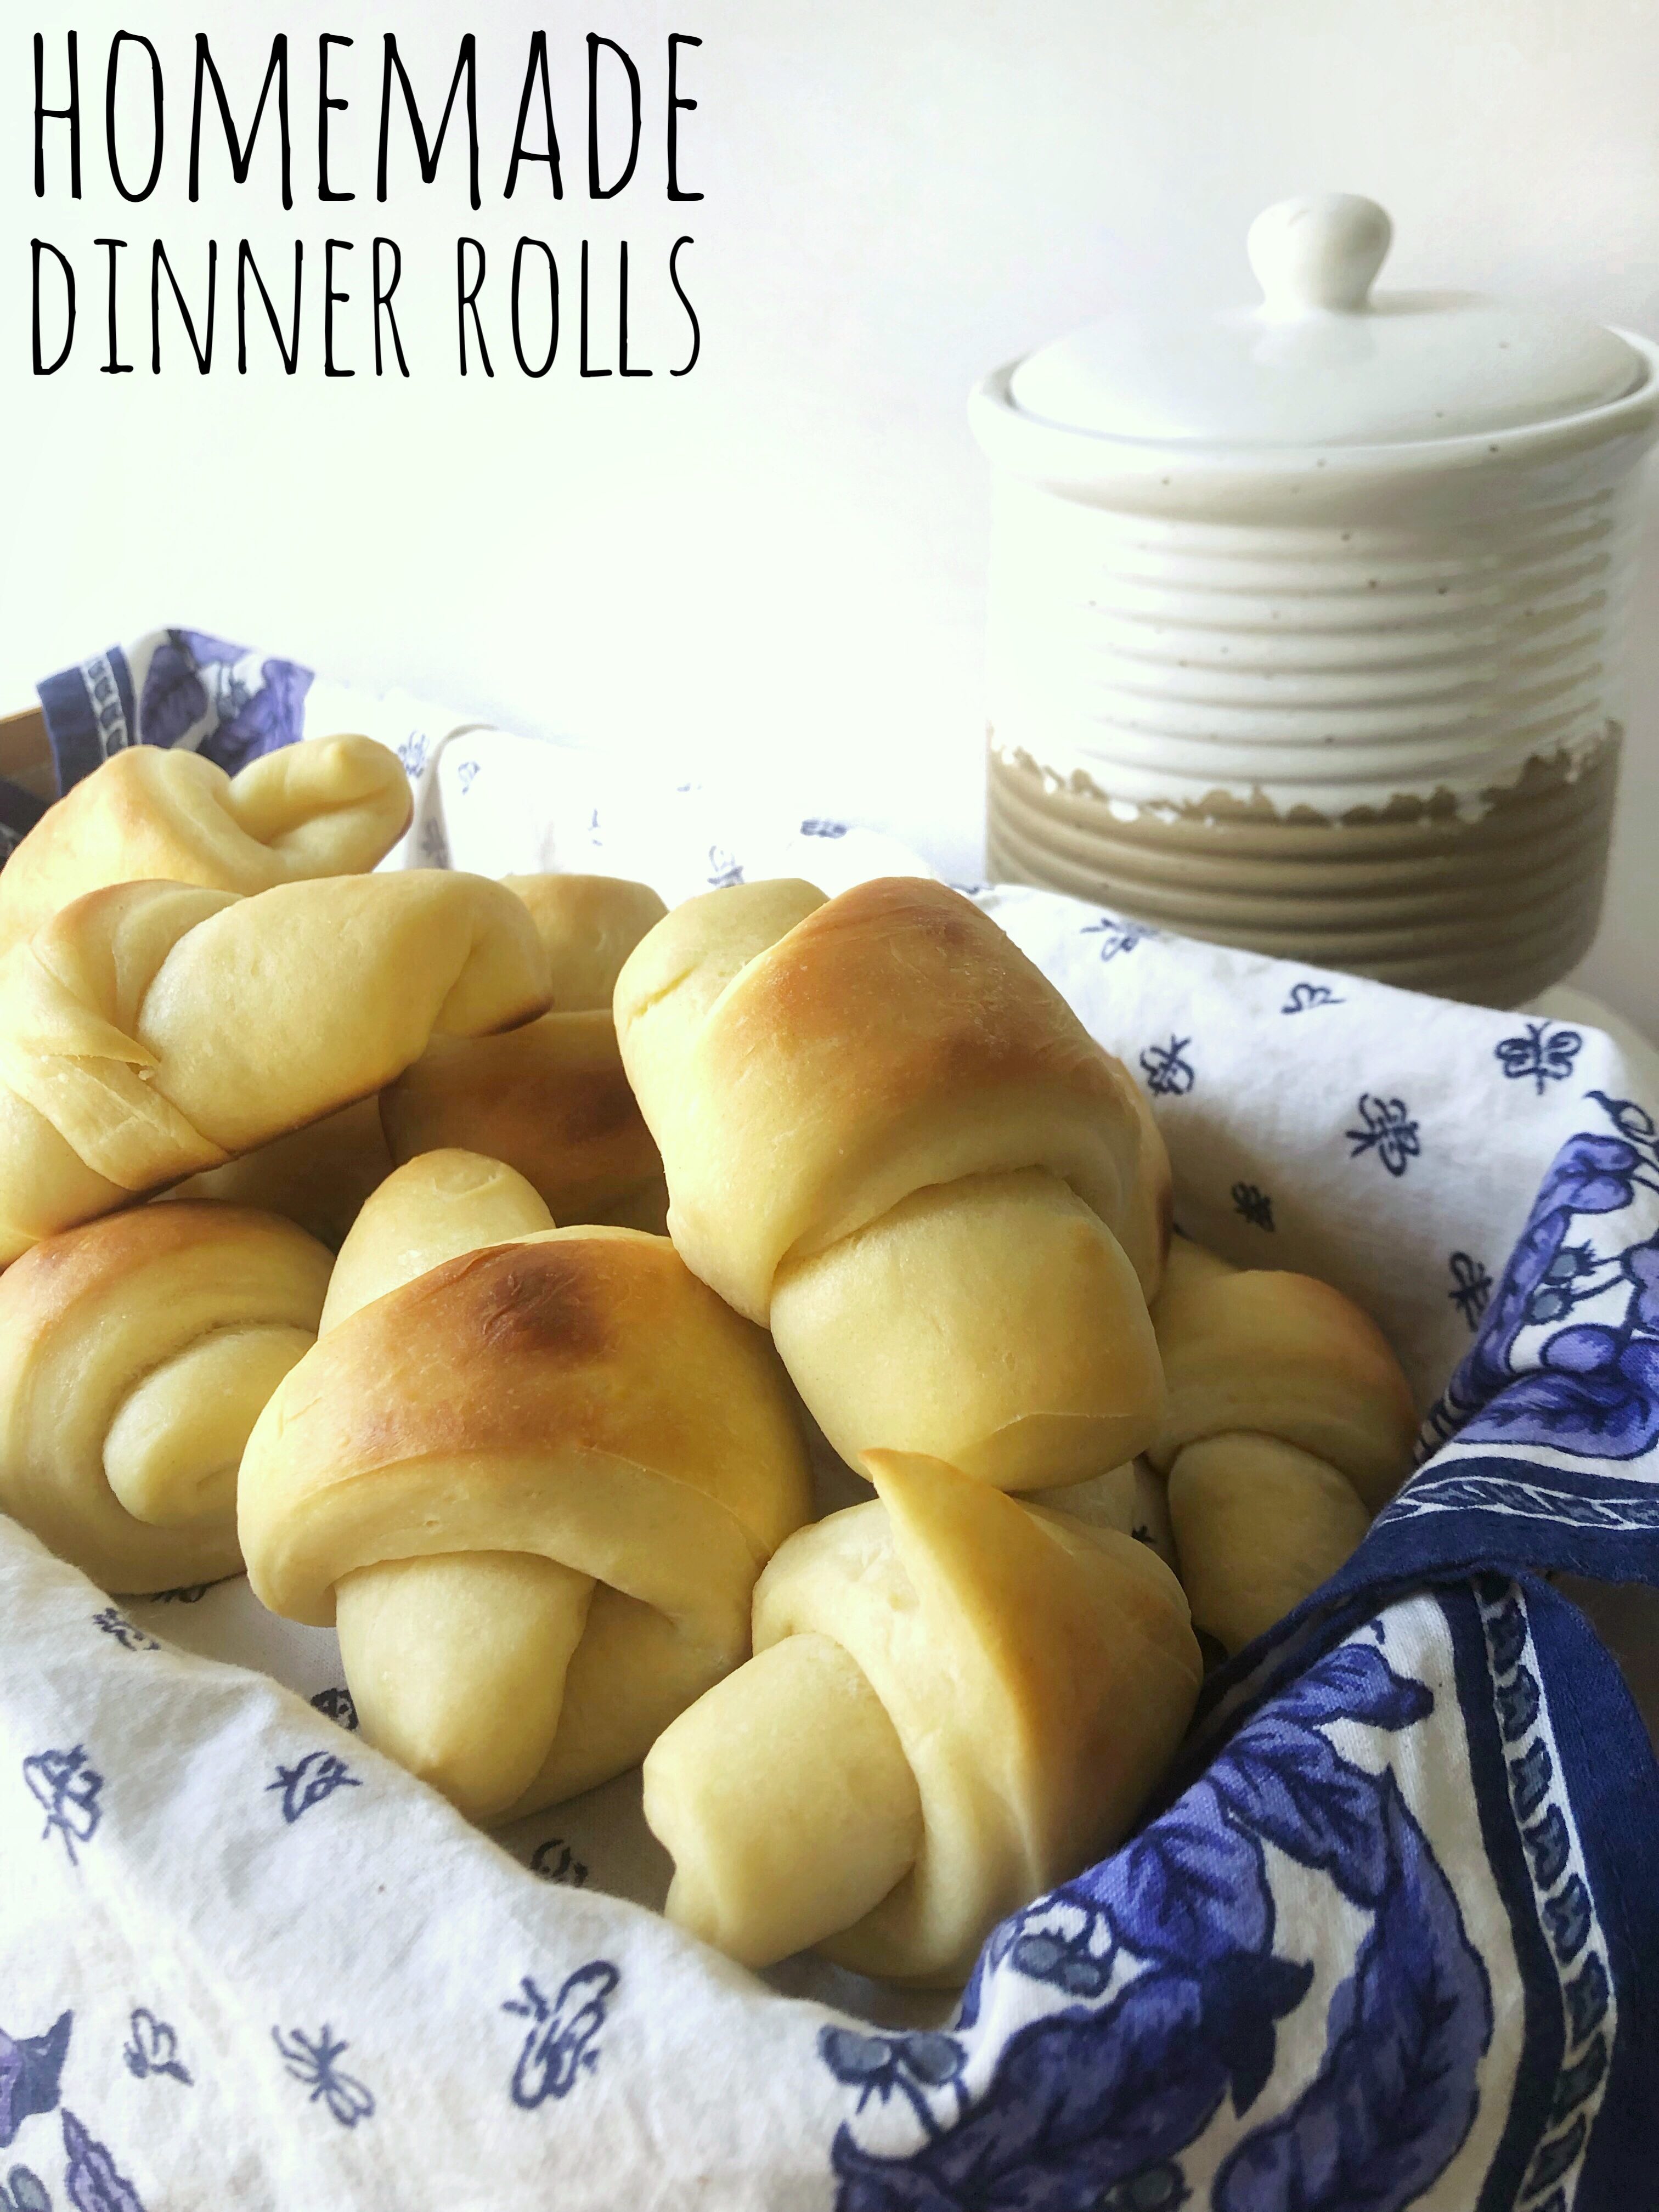 basket of homemade dinner rolls with blue and white napkin